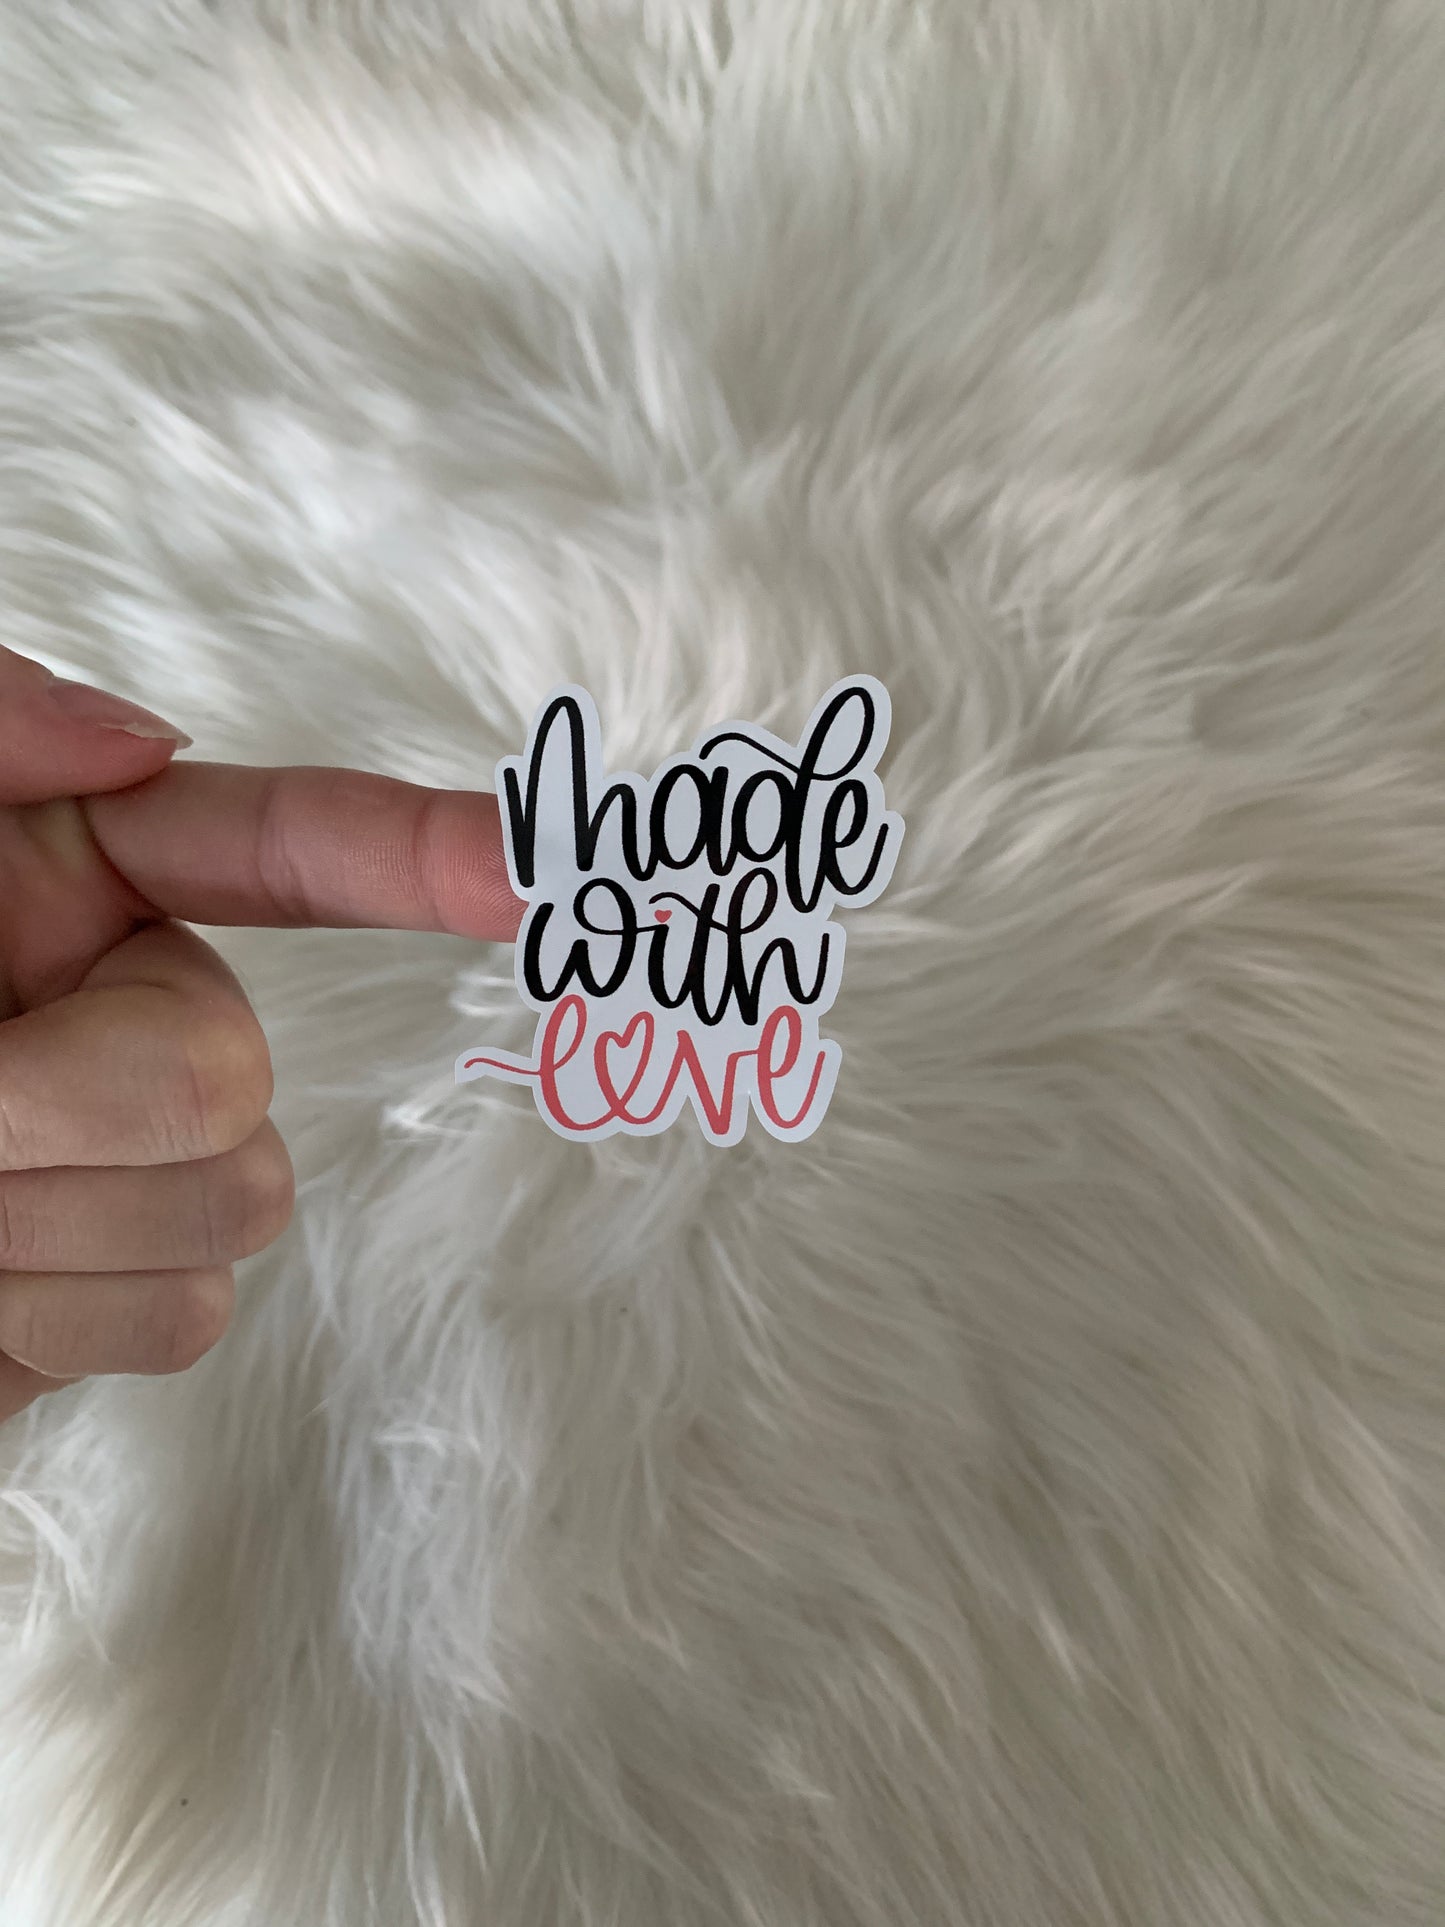 Valentines Day Small Business Shipping Sticker Pack